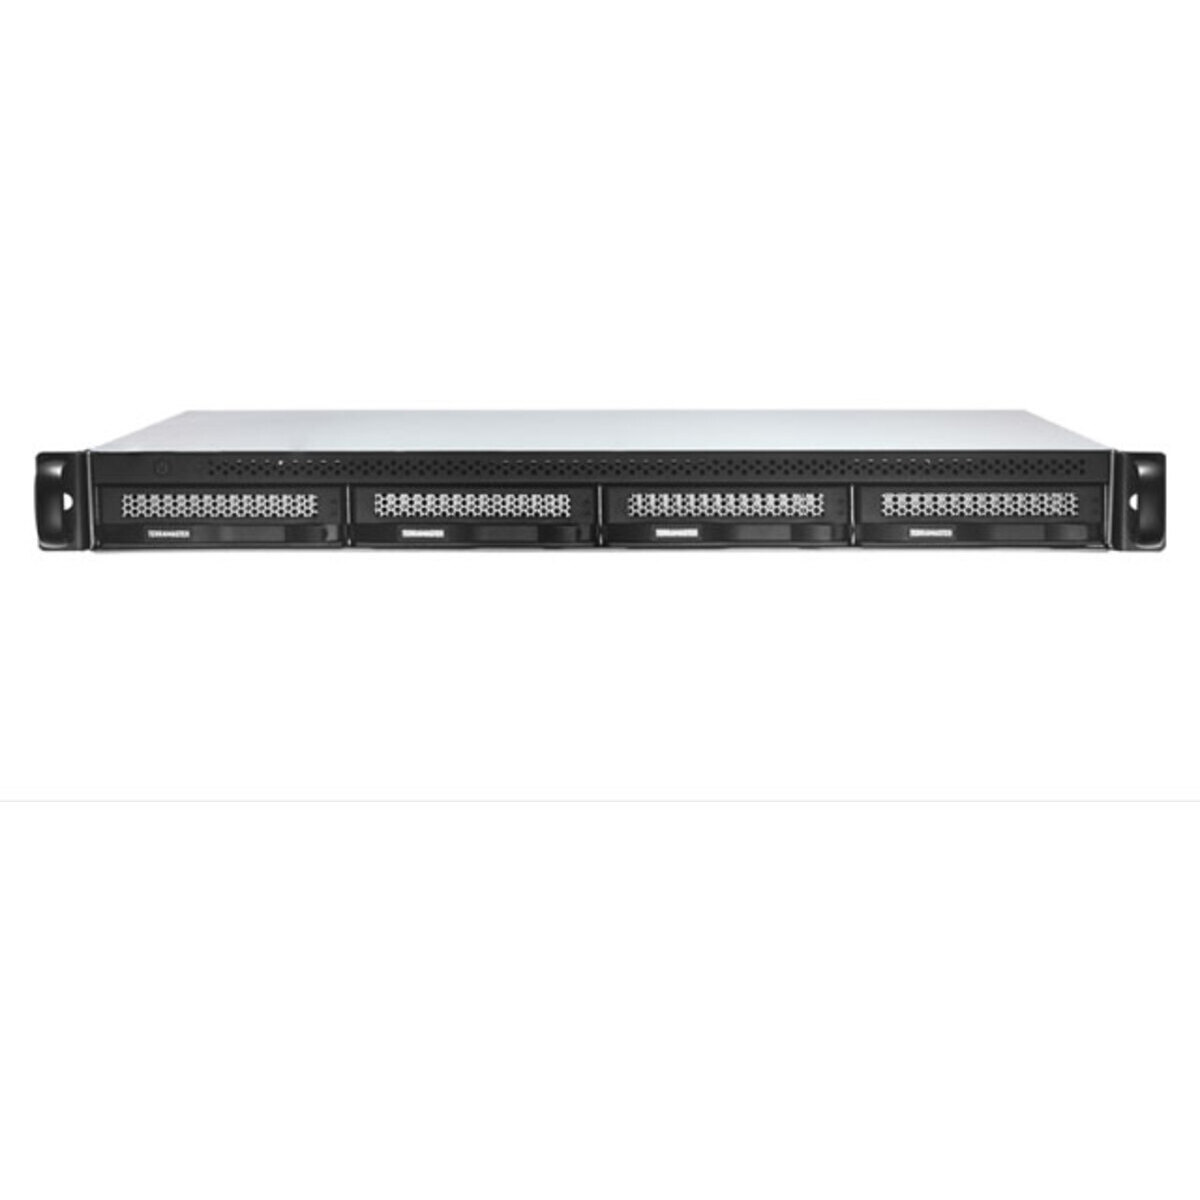 TerraMaster U4-423 RackMount 4-Bay Multimedia / Power User / Business NAS - Network Attached Storage Device Burn-In Tested Configurations - FREE RAM UPGRADE U4-423